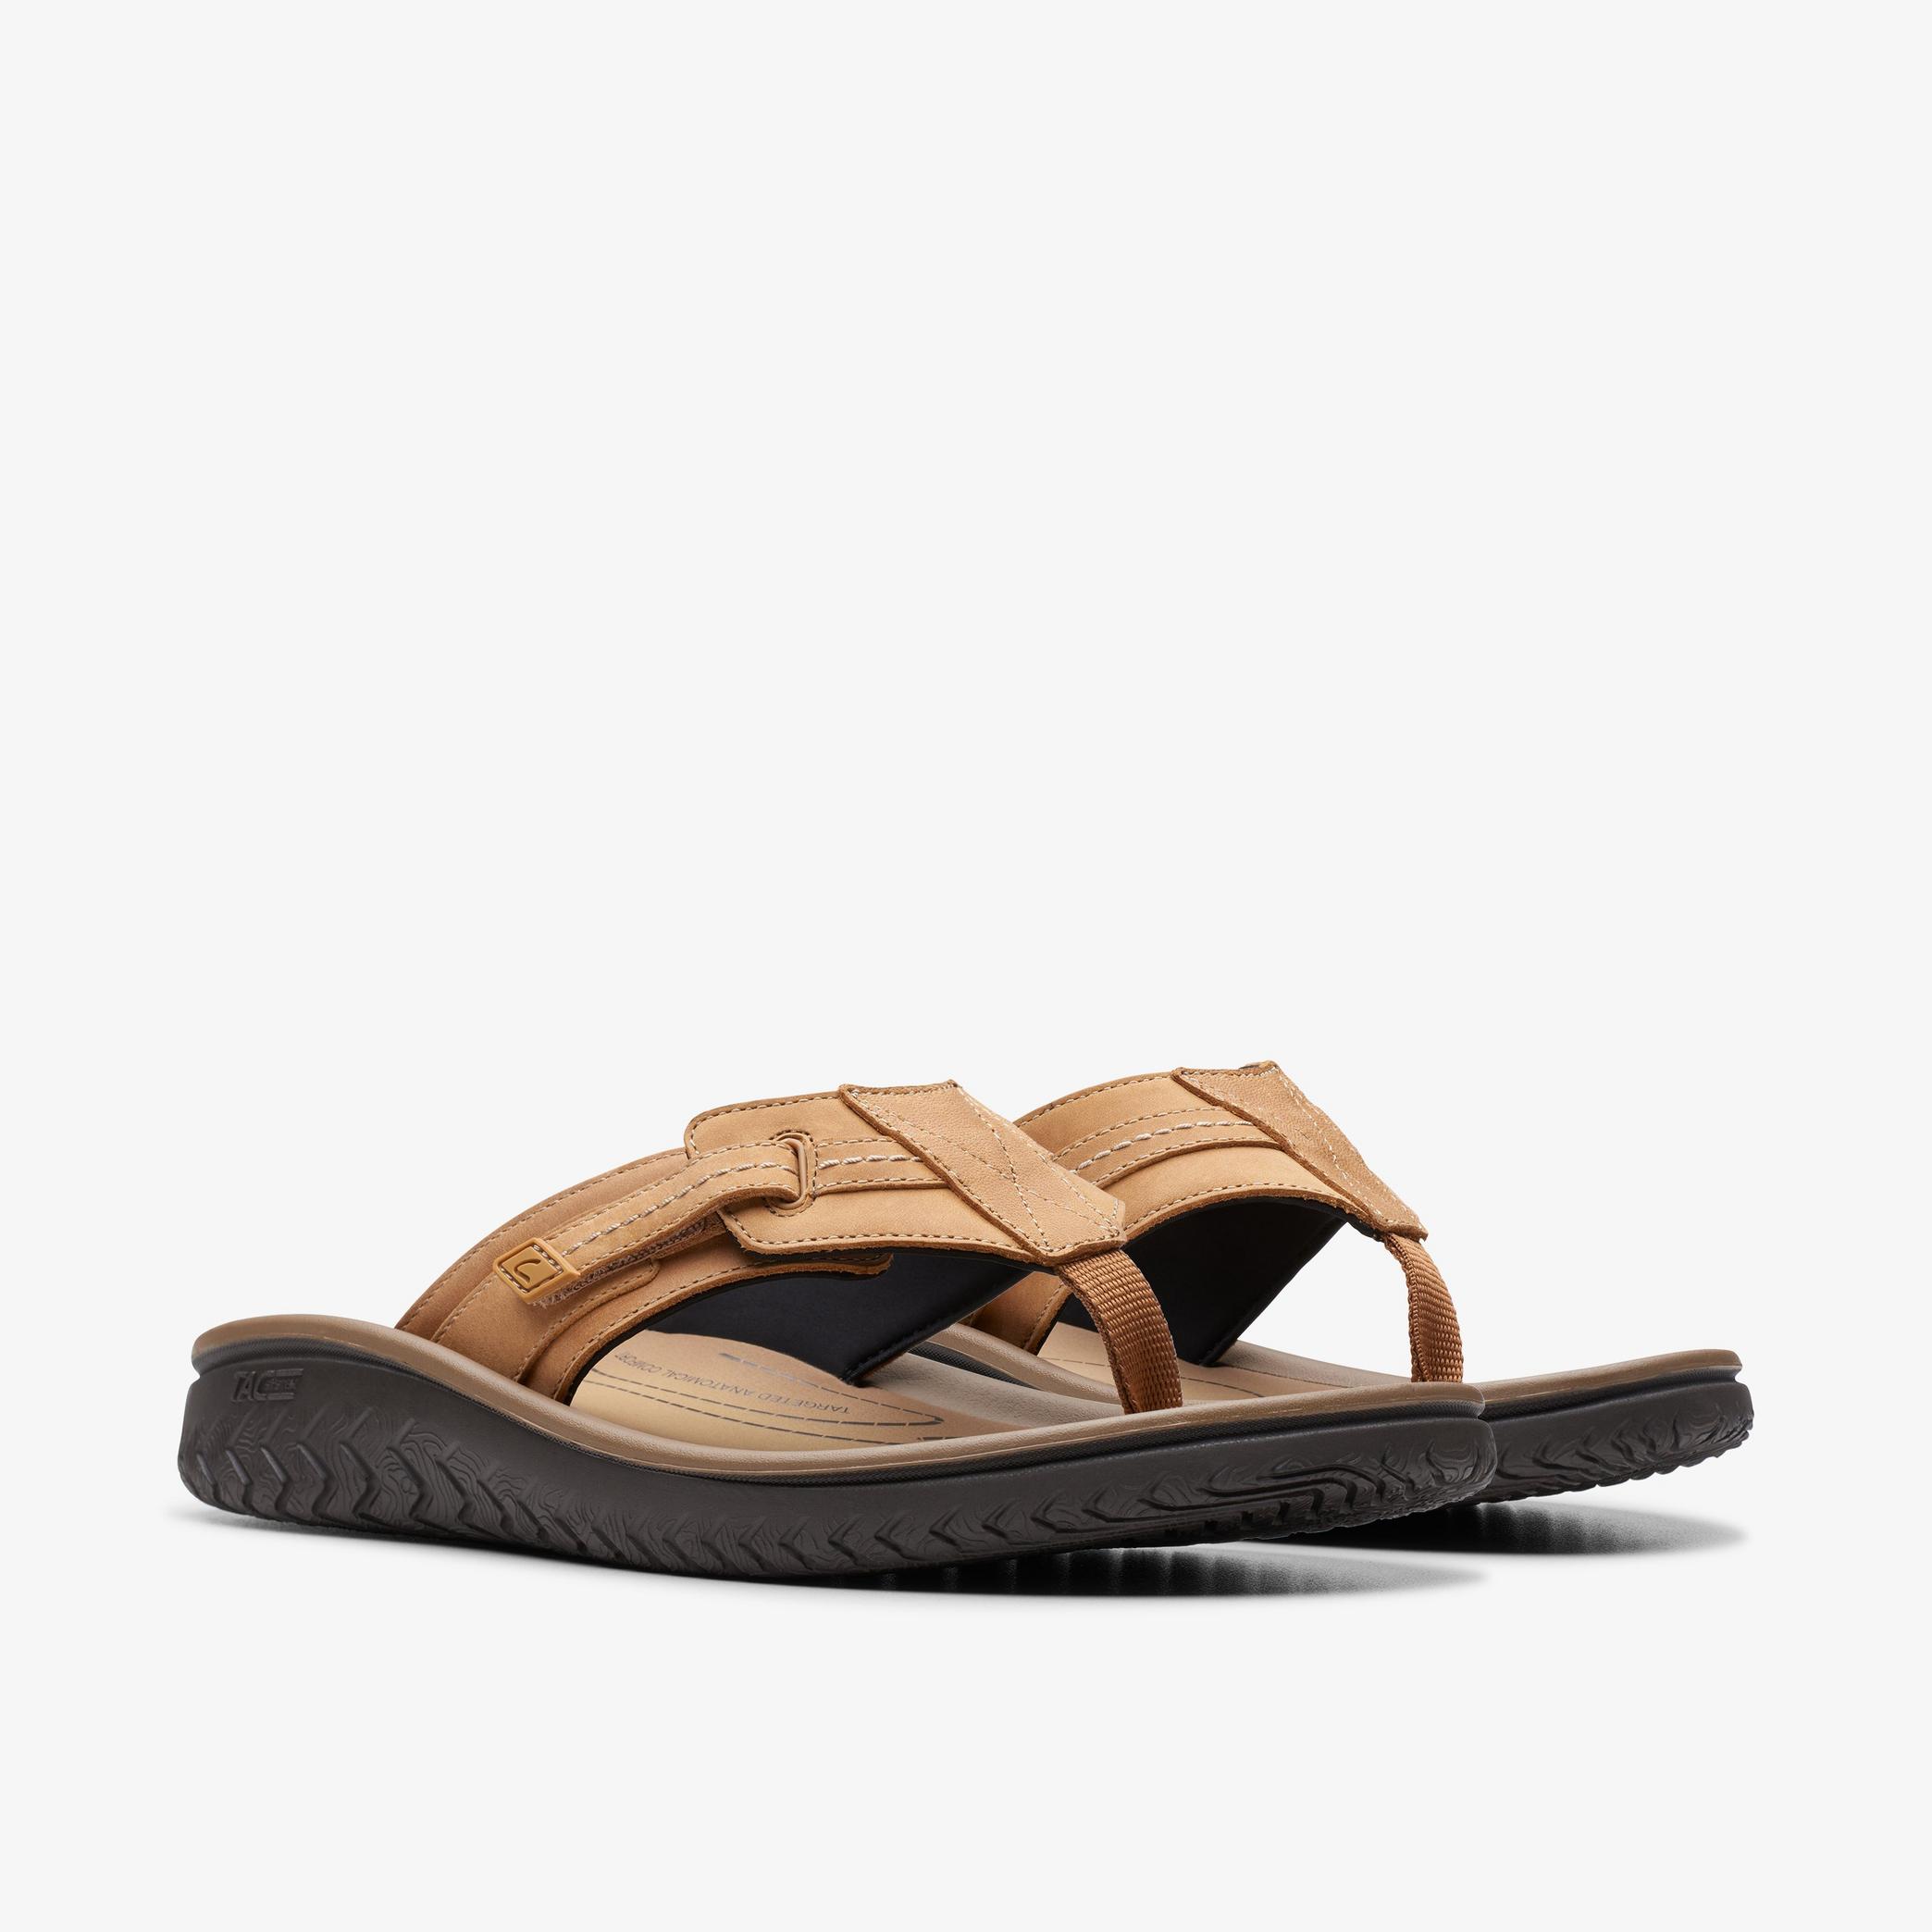 WESLEY SUN Tan Leather Flip Flop, view 4 of 6